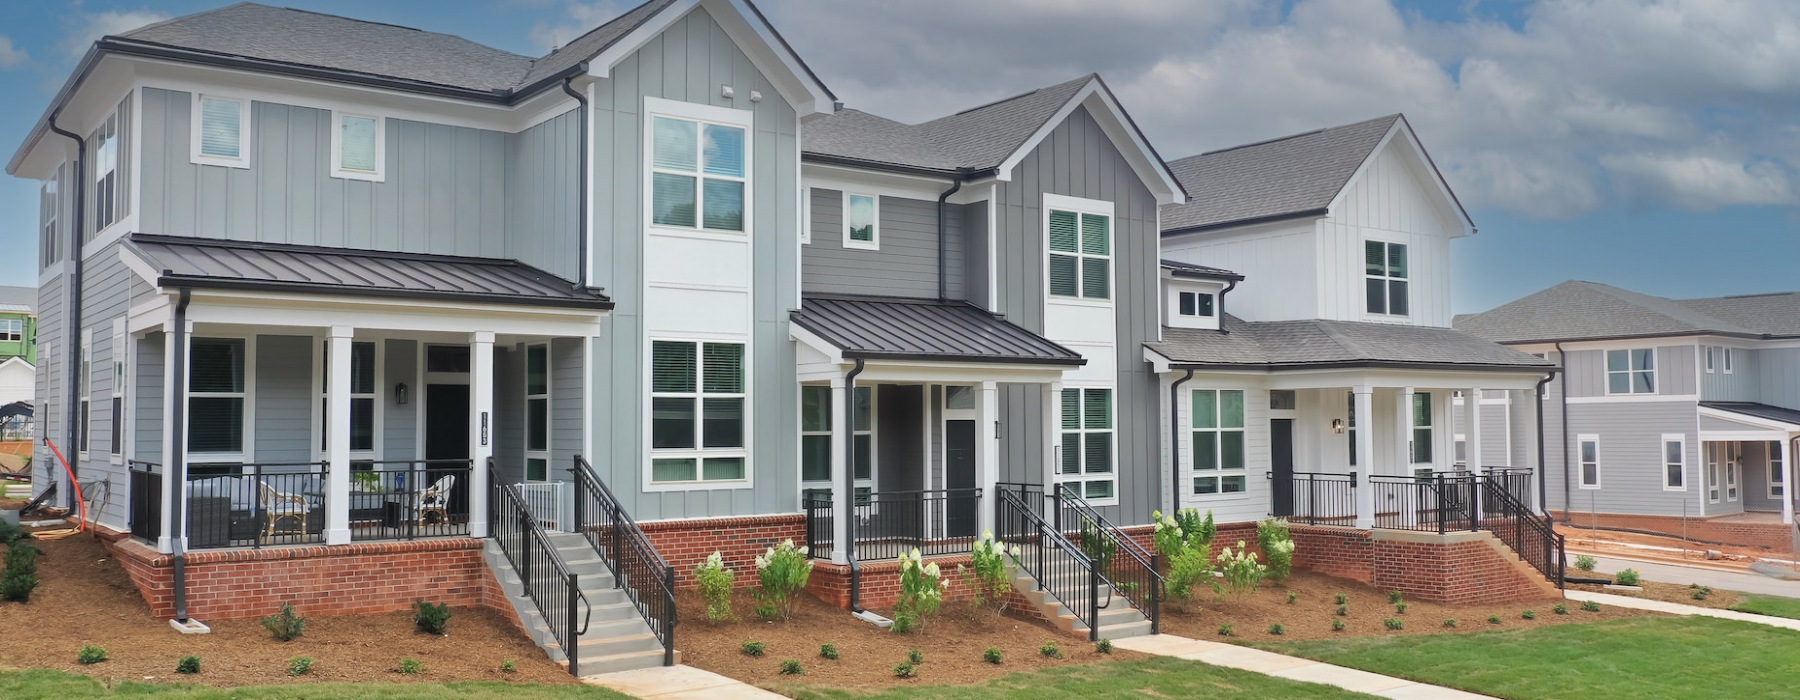 Townhomes for Rent In Ballantyne